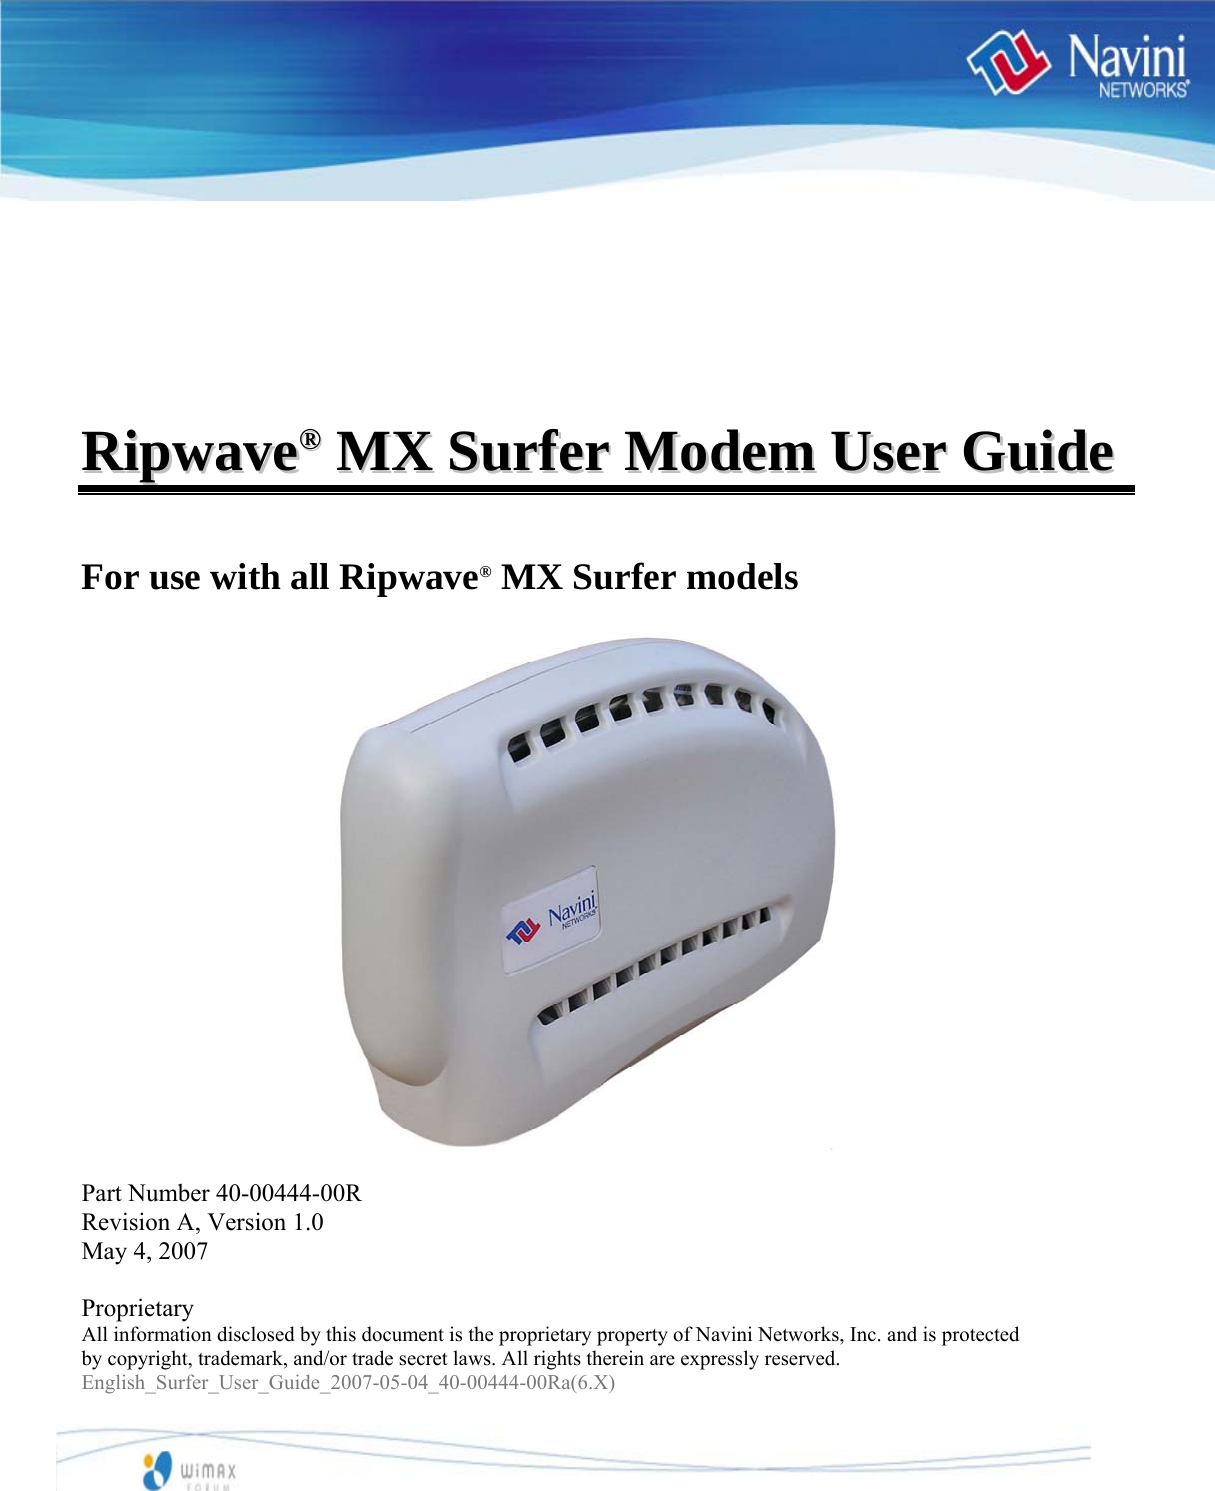           RRiippwwaavvee®®  MMXX  SSuurrffeerr  MMooddeemm  UUsseerr  GGuuiiddee    For use with all Ripwave® MX Surfer models                     Part Number 40-00444-00R Revision A, Version 1.0 May 4, 2007  Proprietary All information disclosed by this document is the proprietary property of Navini Networks, Inc. and is protected  by copyright, trademark, and/or trade secret laws. All rights therein are expressly reserved. English_Surfer_User_Guide_2007-05-04_40-00444-00Ra(6.X)   